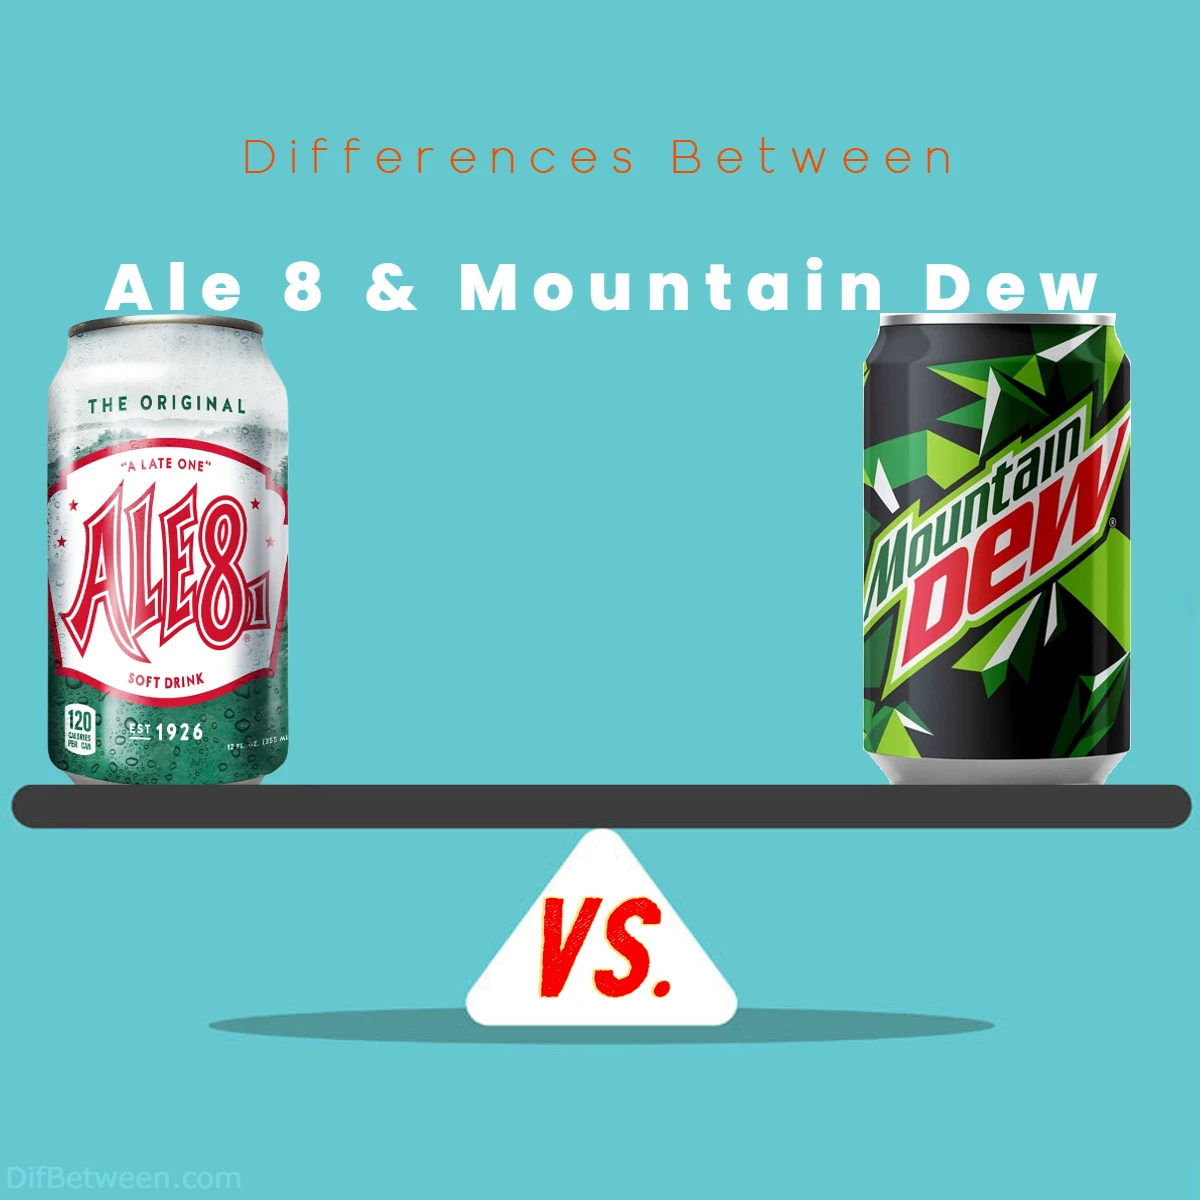 Differences Between Mountain Dew and Ale 8